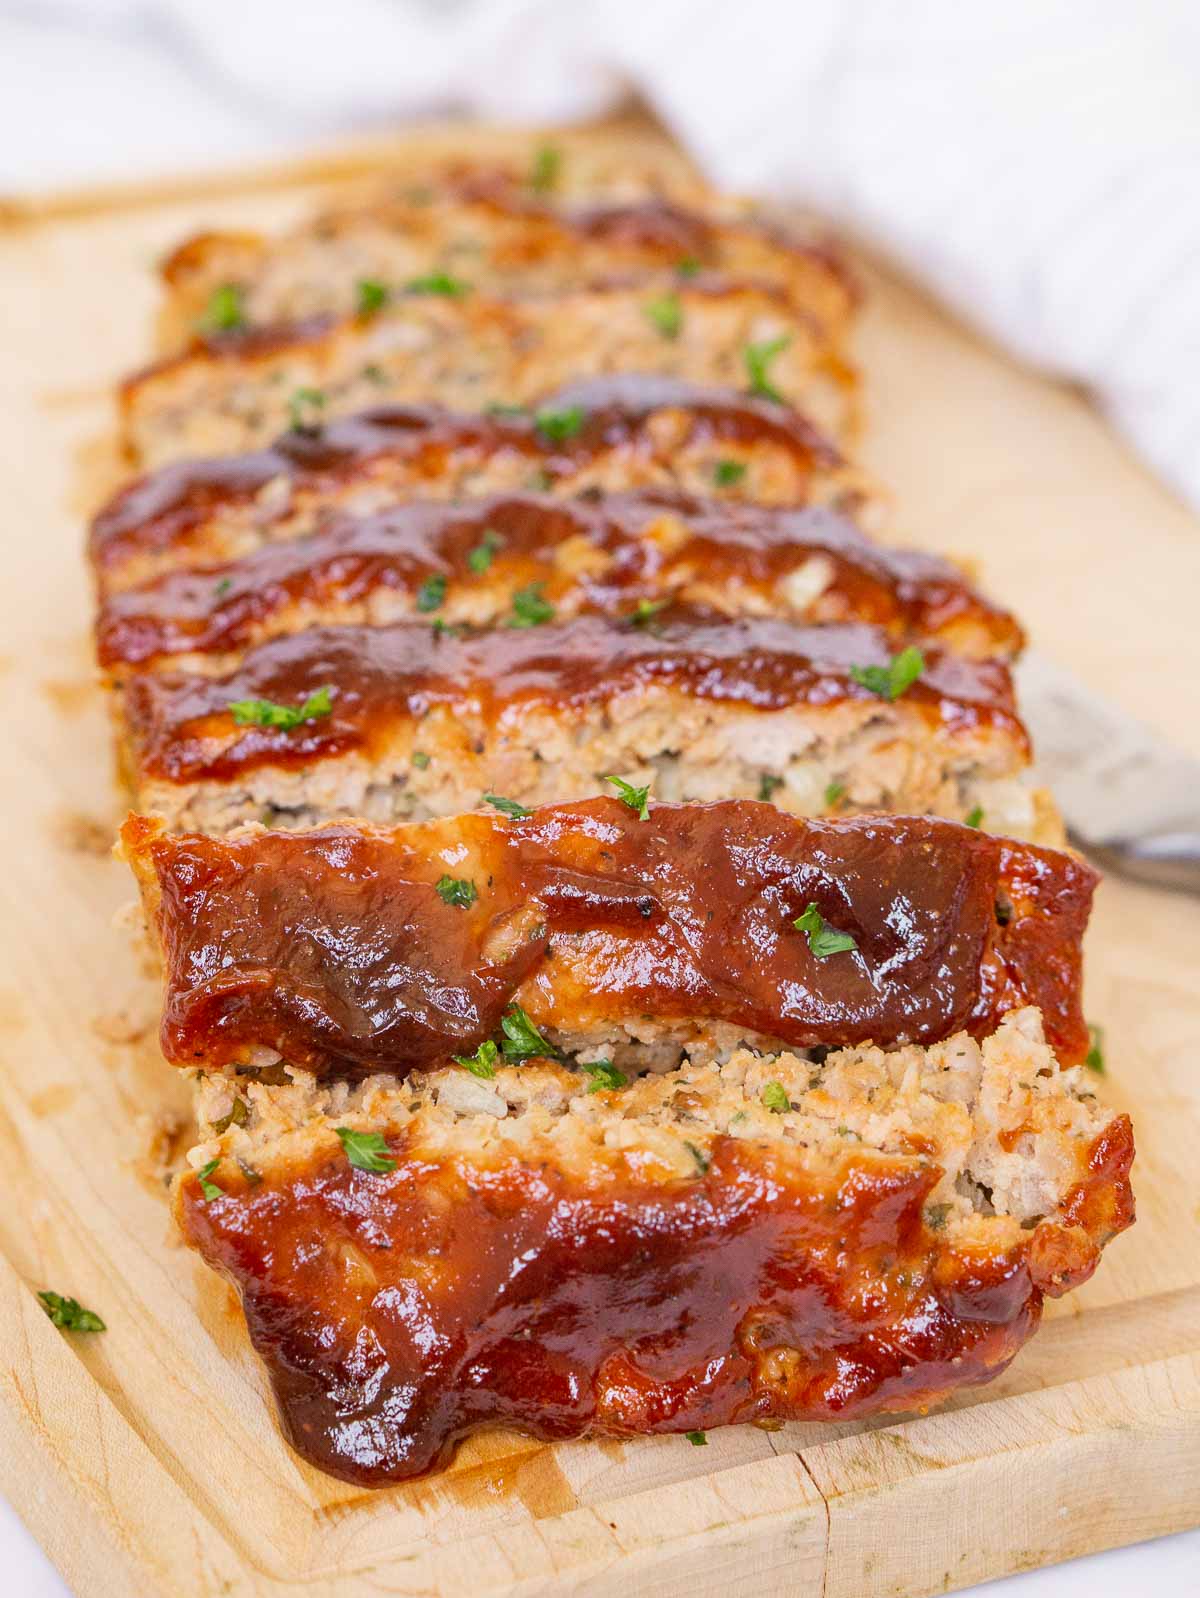 Ground pork meatloaf with glaze on a cutting board